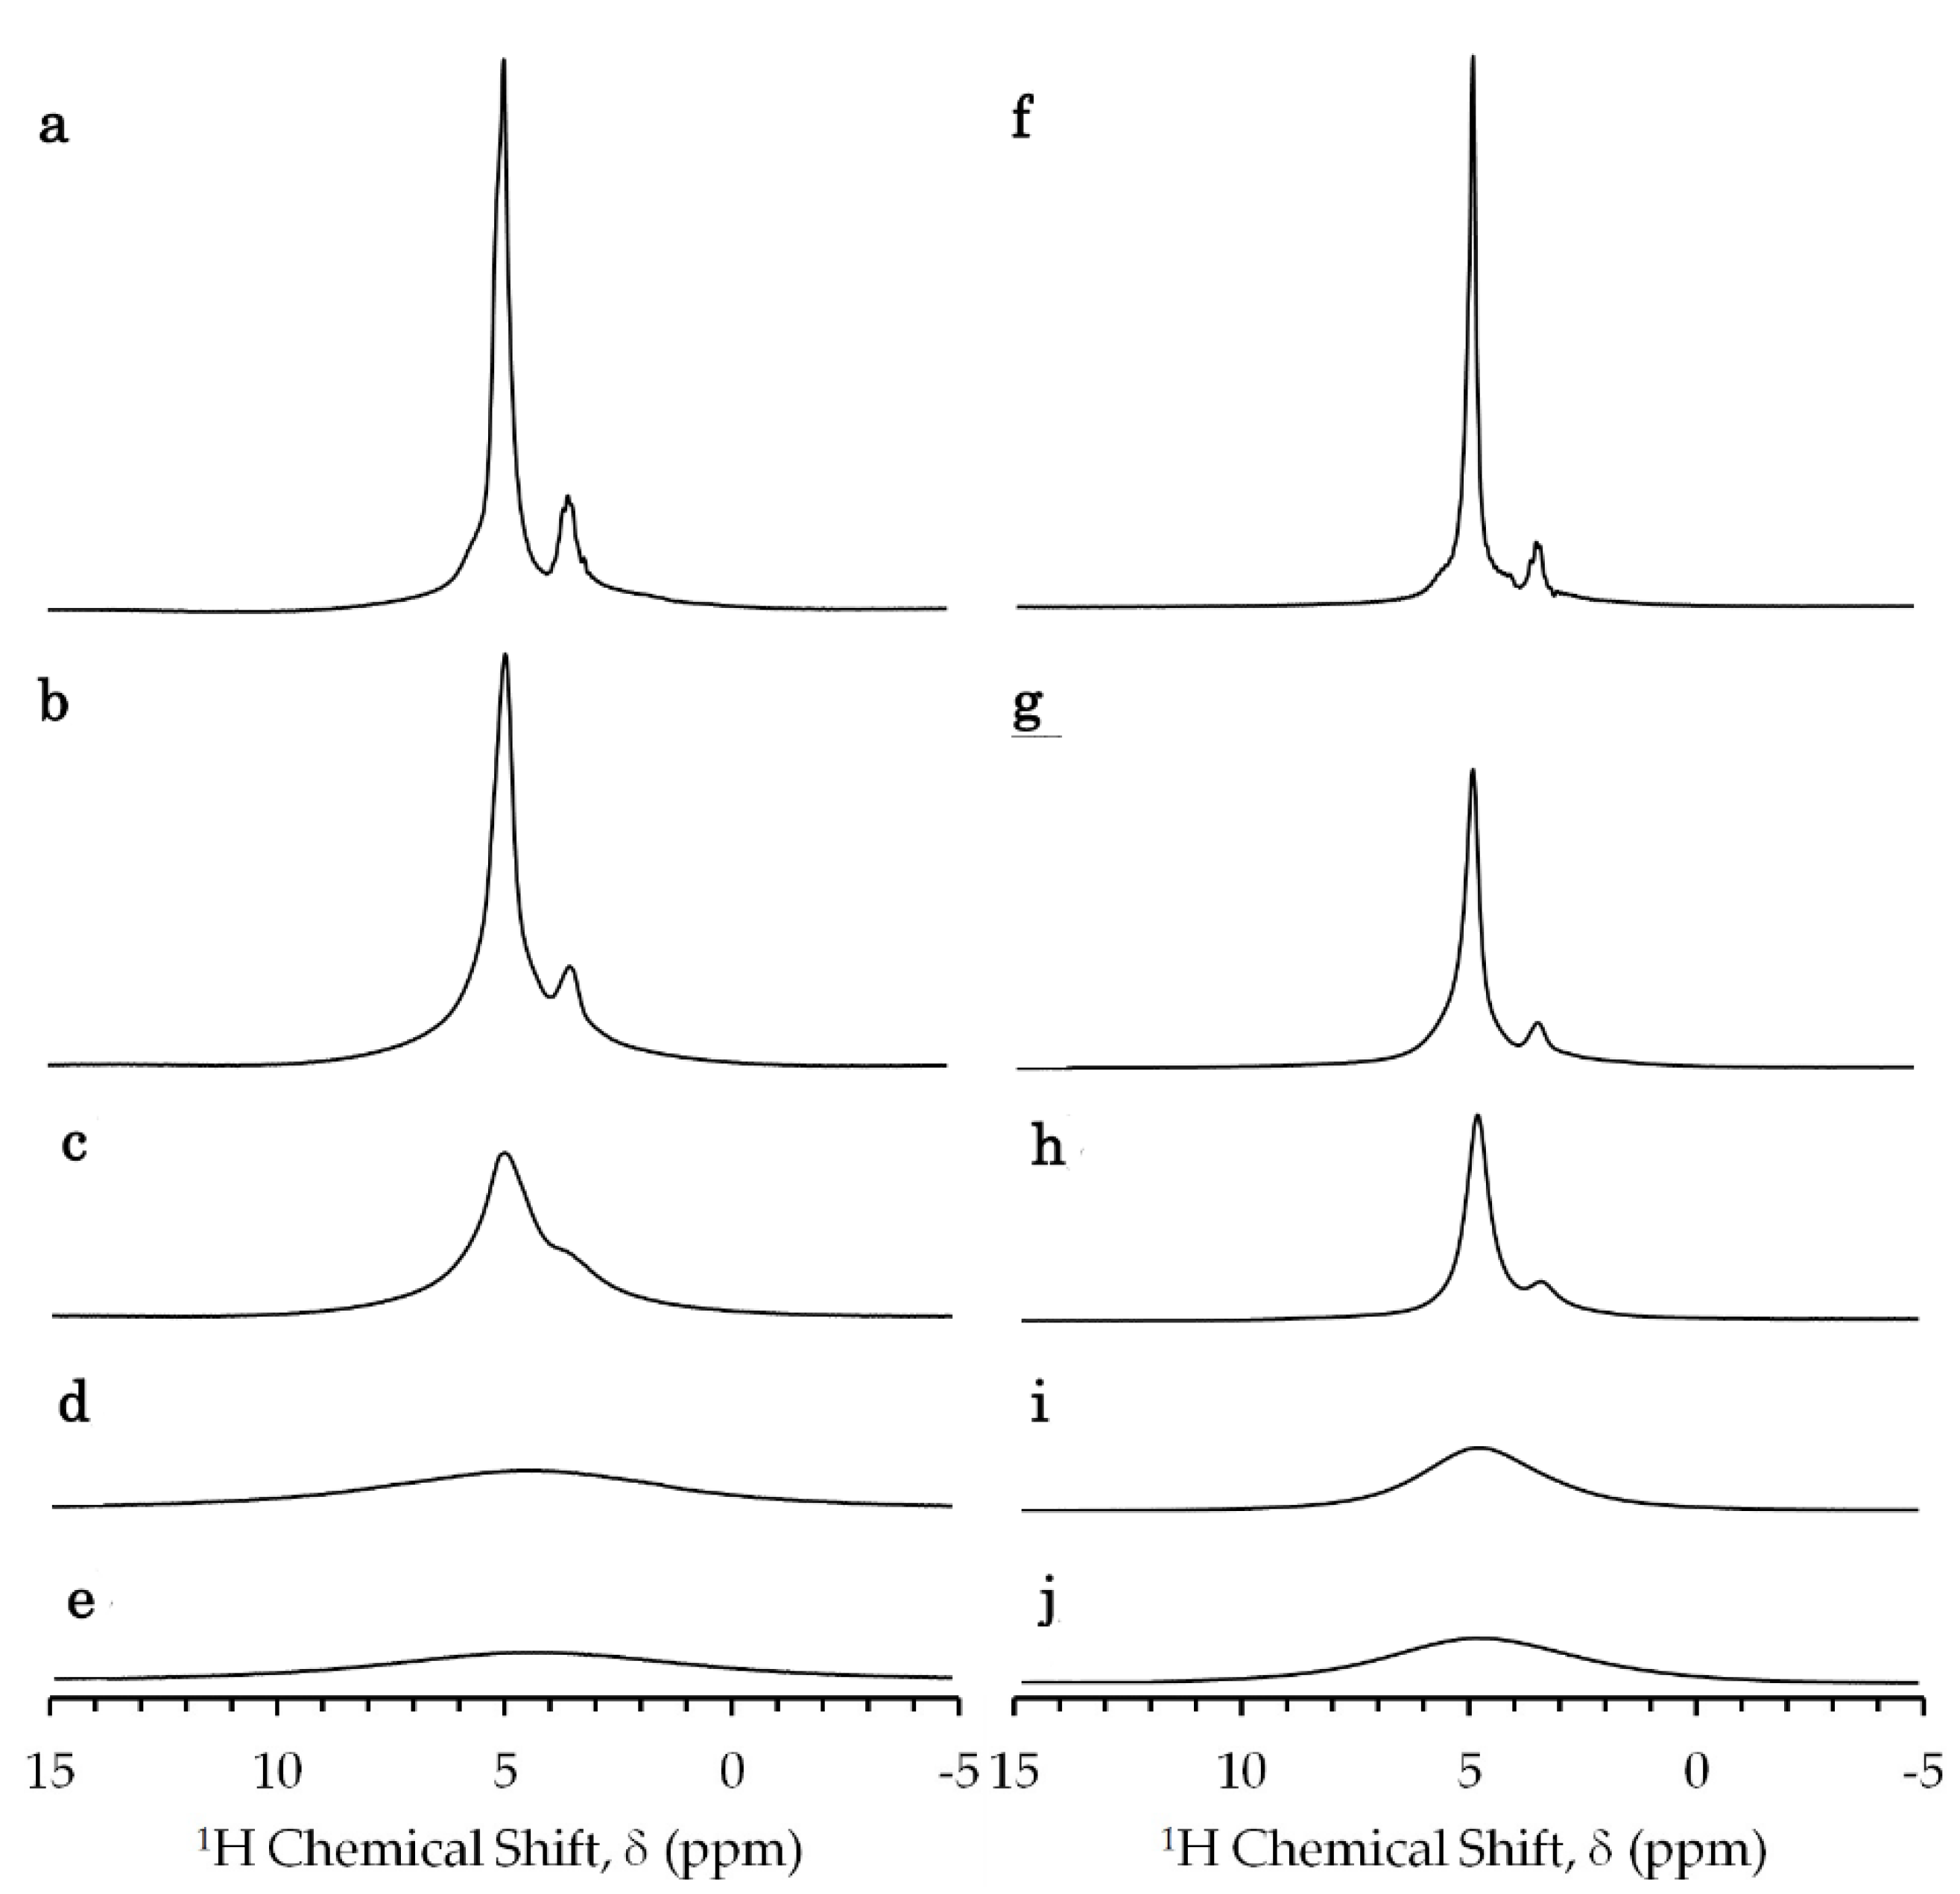 Ijms Free Full Text Gadolinium Complexes As Contrast Agent For Cellular Nmr Spectroscopy Html